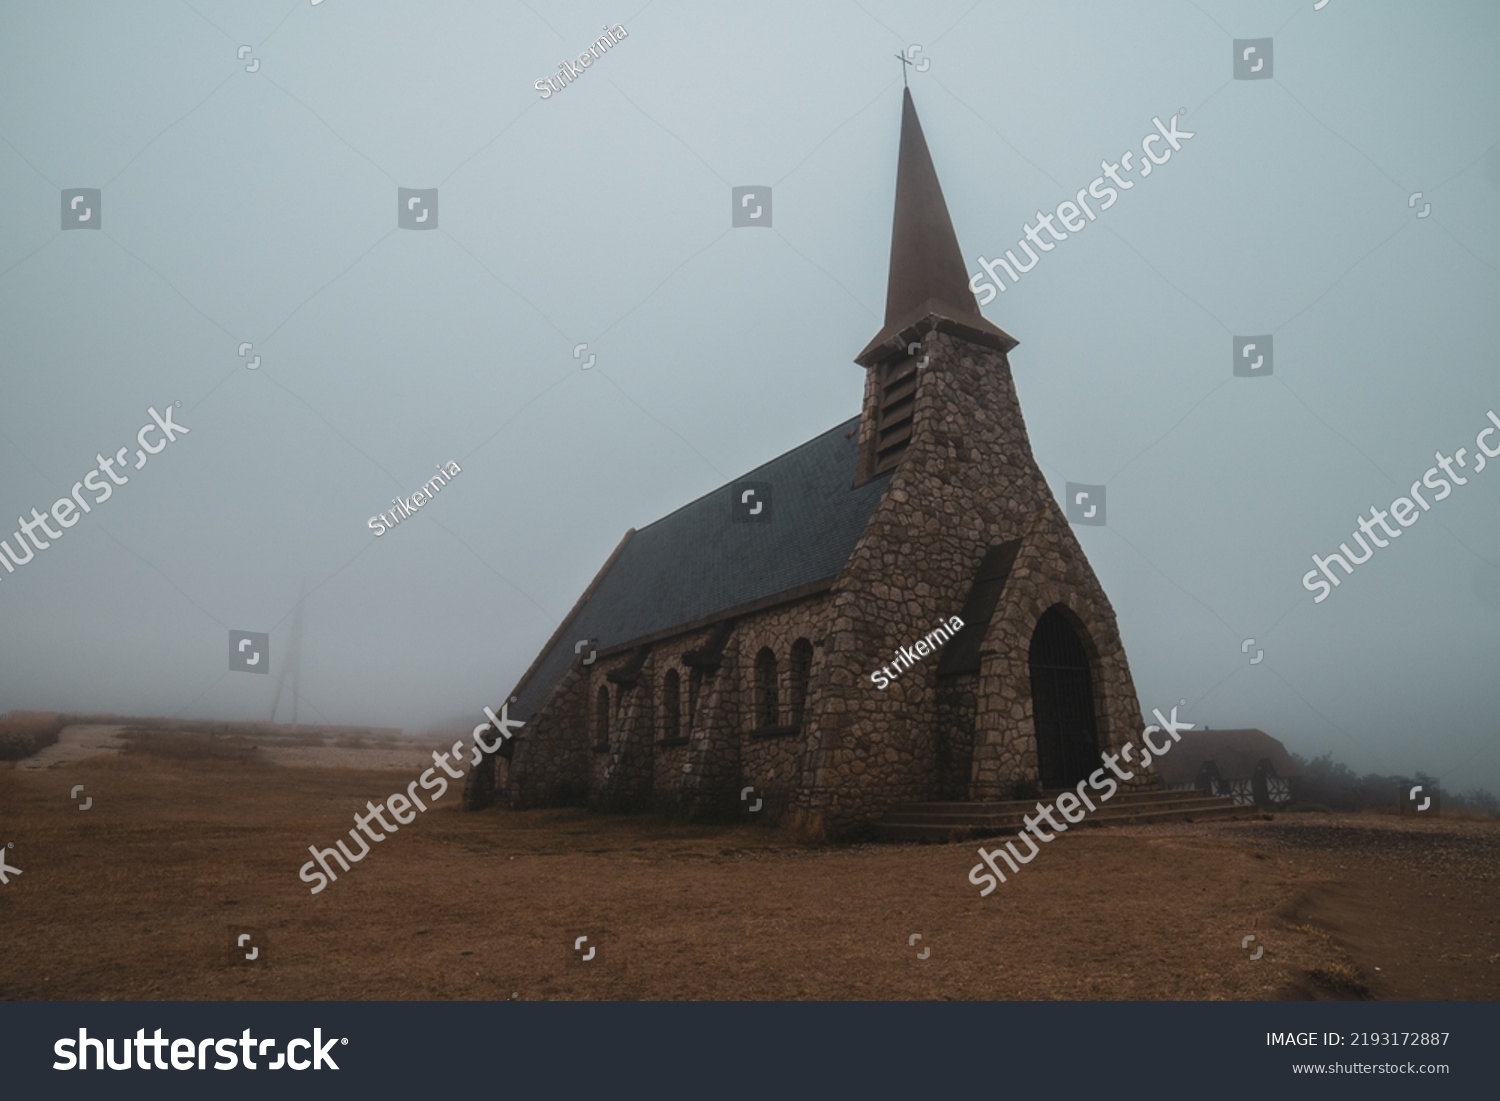 Church on a Cliff. church in the morning mist. Old Abandoned Church in the Fog.  #2193172887